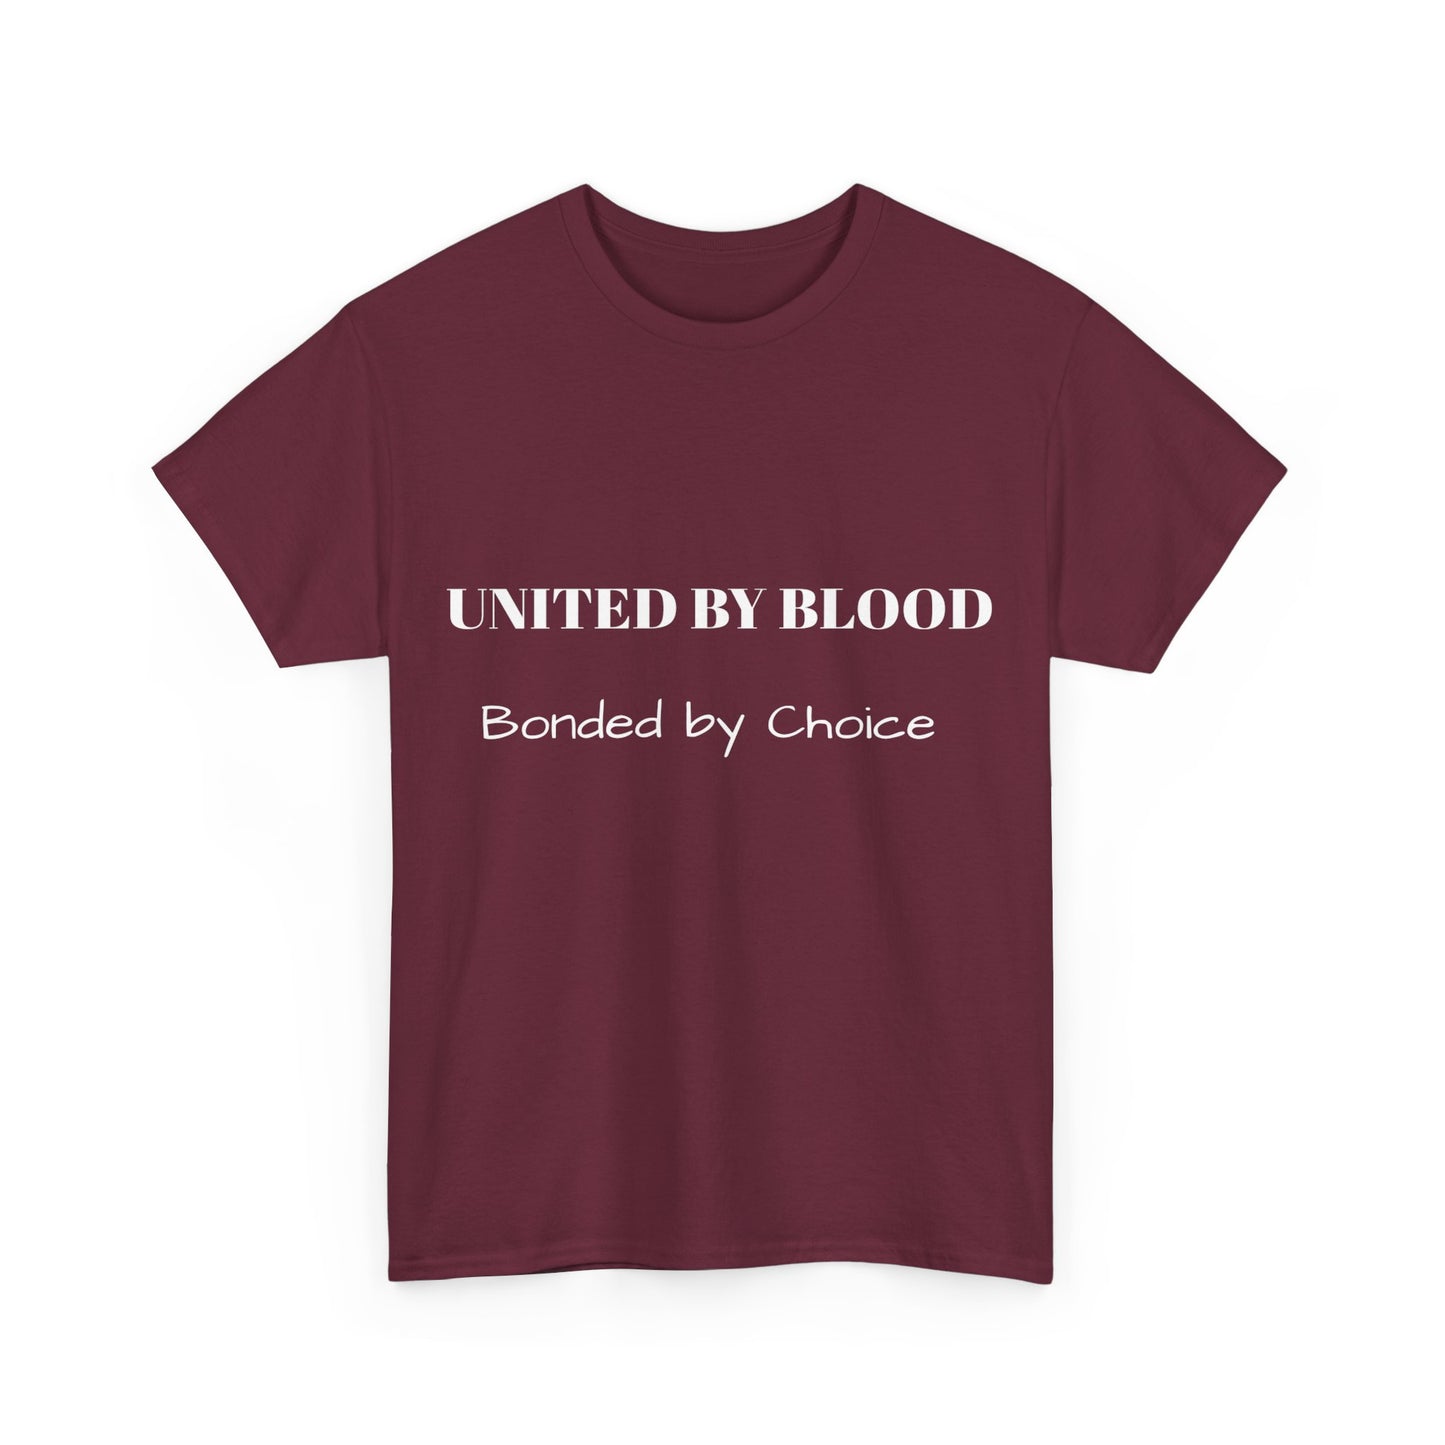 United by Blood, Bonded by Choice